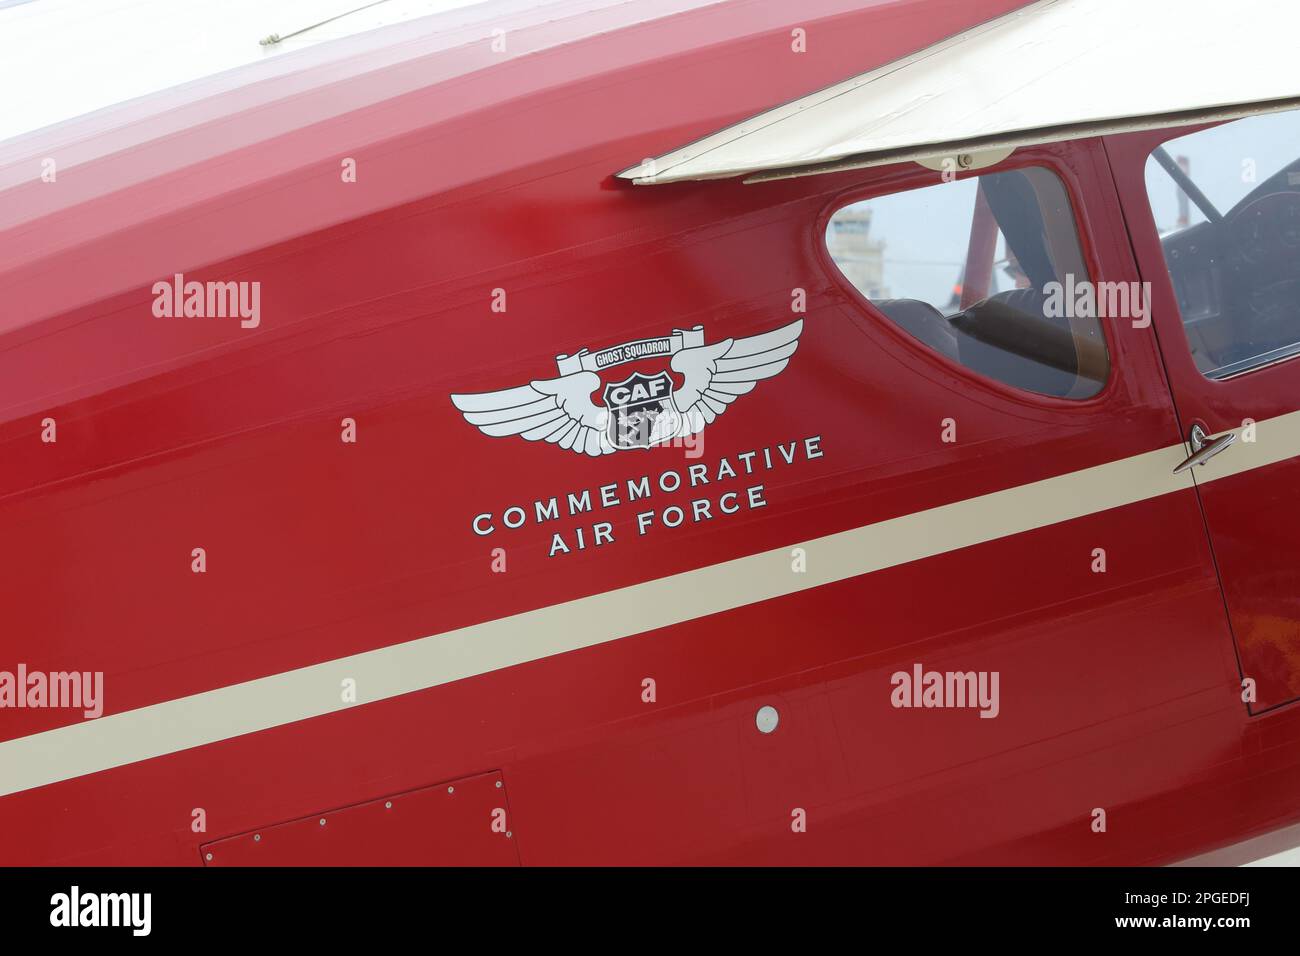 Point Mugu, California / USA - March 18, 2023: A Commemorative Air Force Ghost Squadron logo is shown on the side of a vintage airplane. CAF is an org Stock Photo